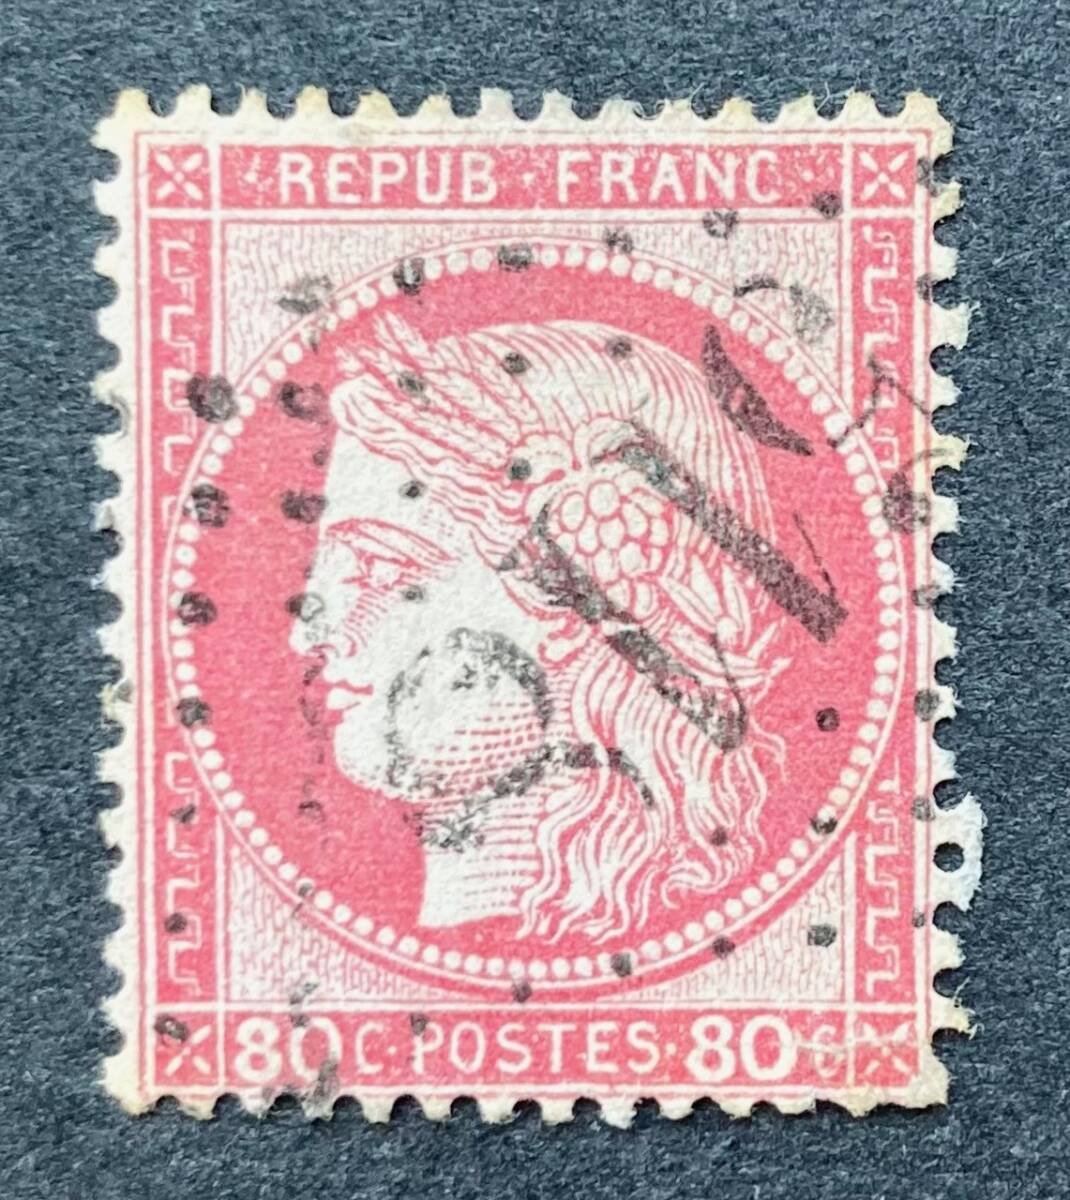 [ France ] Ceres 80c. Yokohama France department 5118 delete seal single one-side * small defect goods 